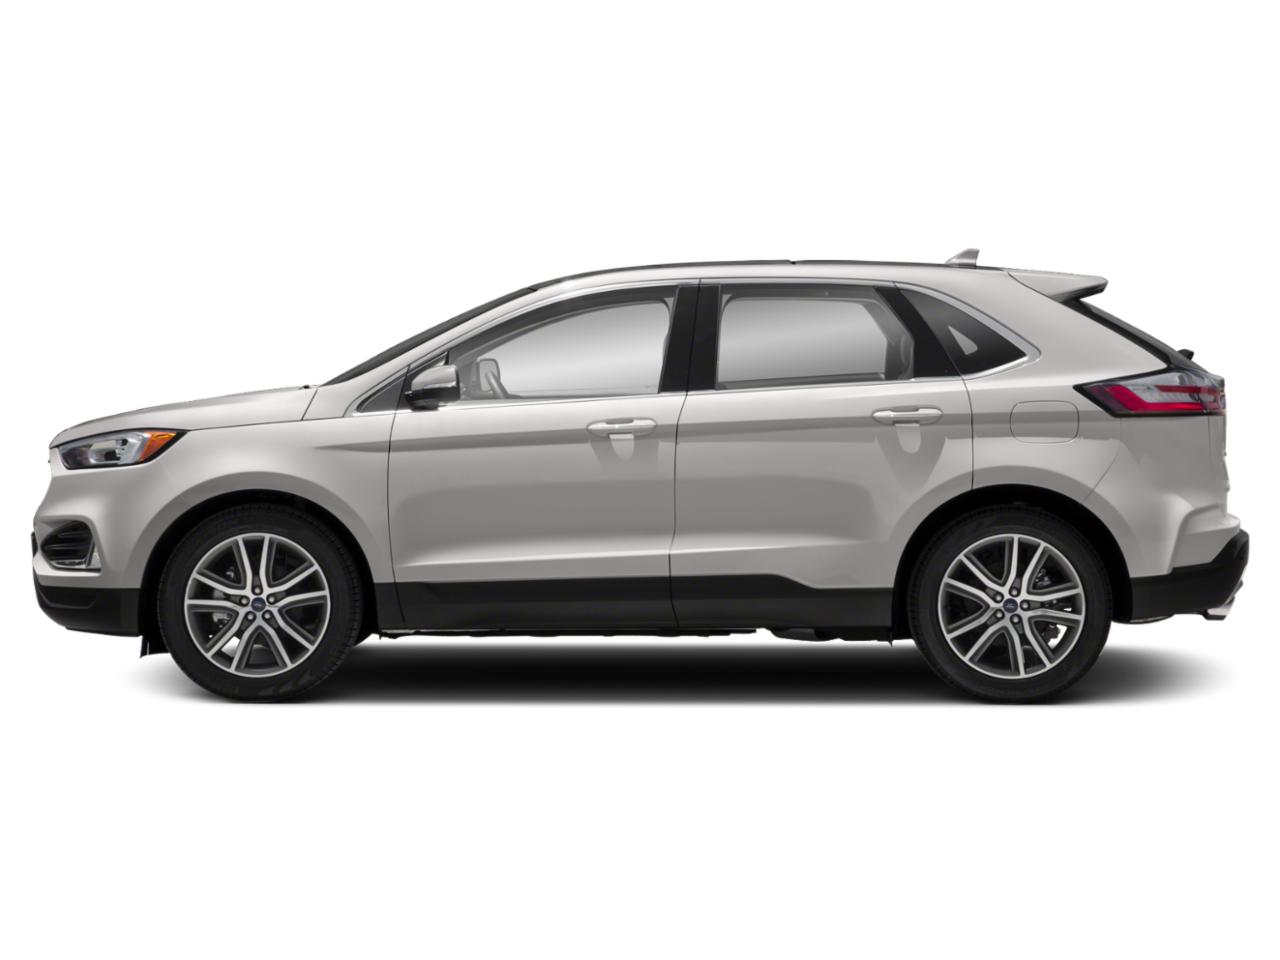 Used 2020 Ford Edge SEL with VIN 2FMPK4J97LBA19558 for sale in Kenyon, Minnesota